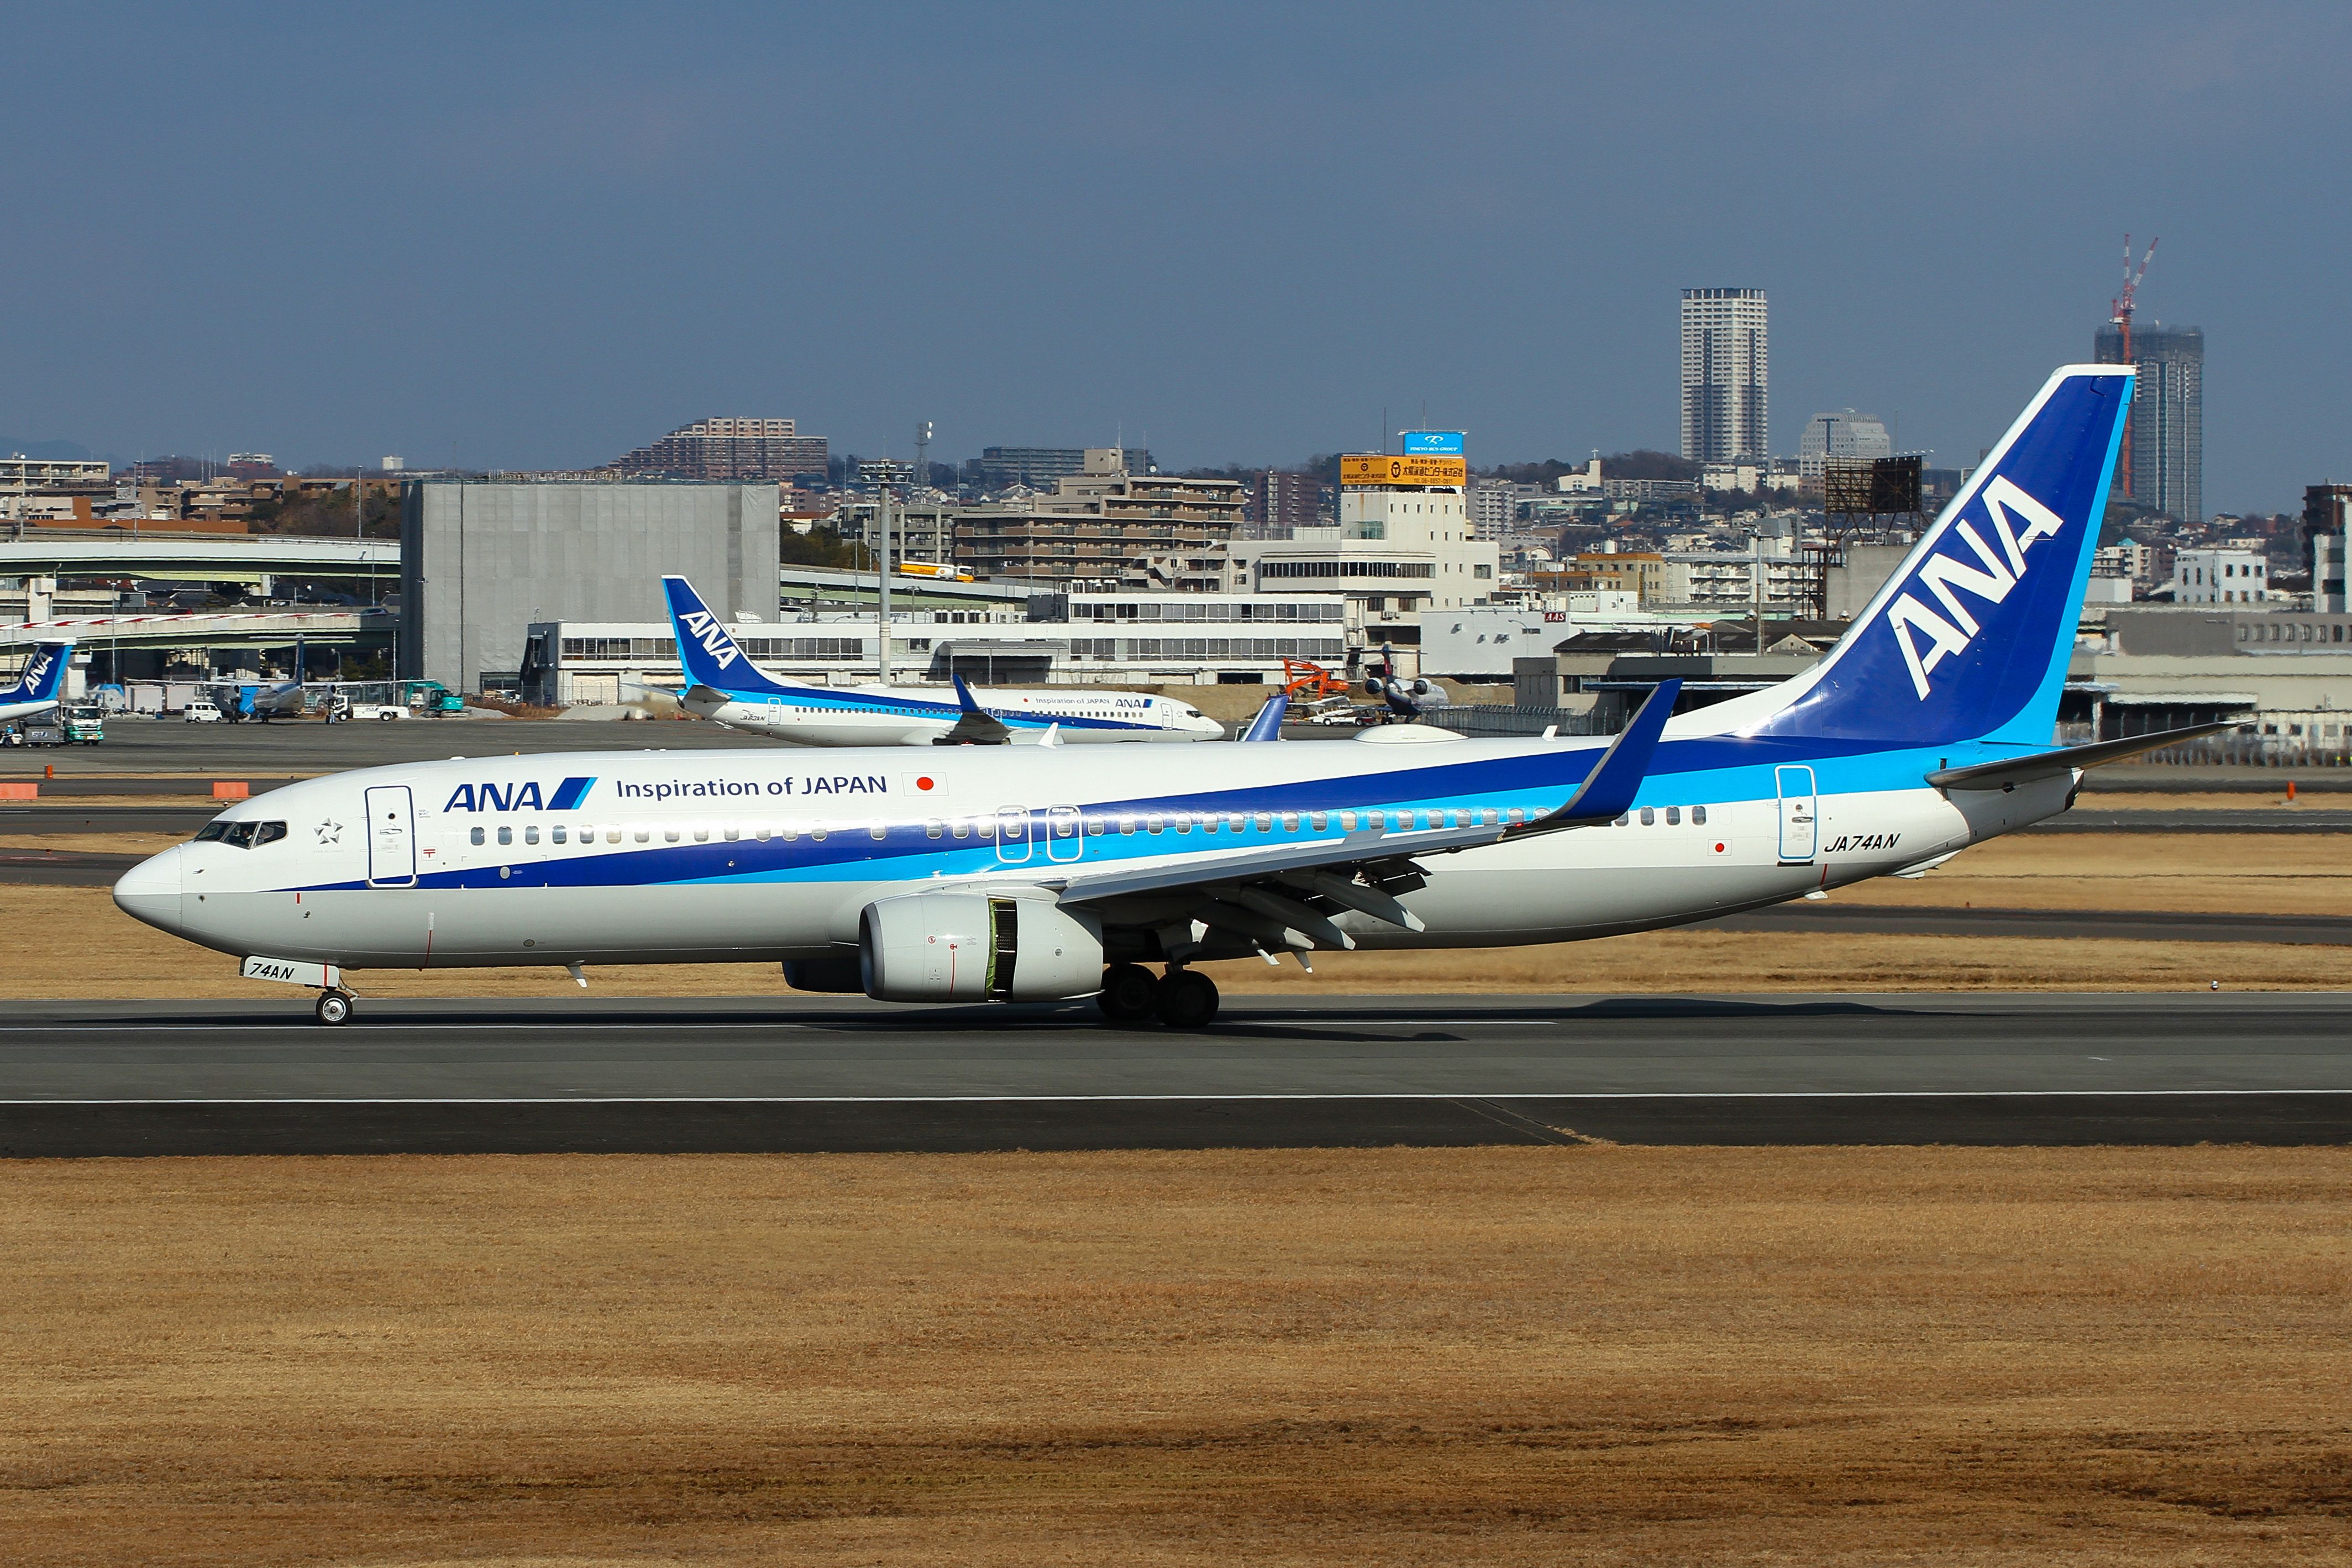 All Nippon Airways Boeing 737-800 on the runway at Osaka shutterstock_1088448140